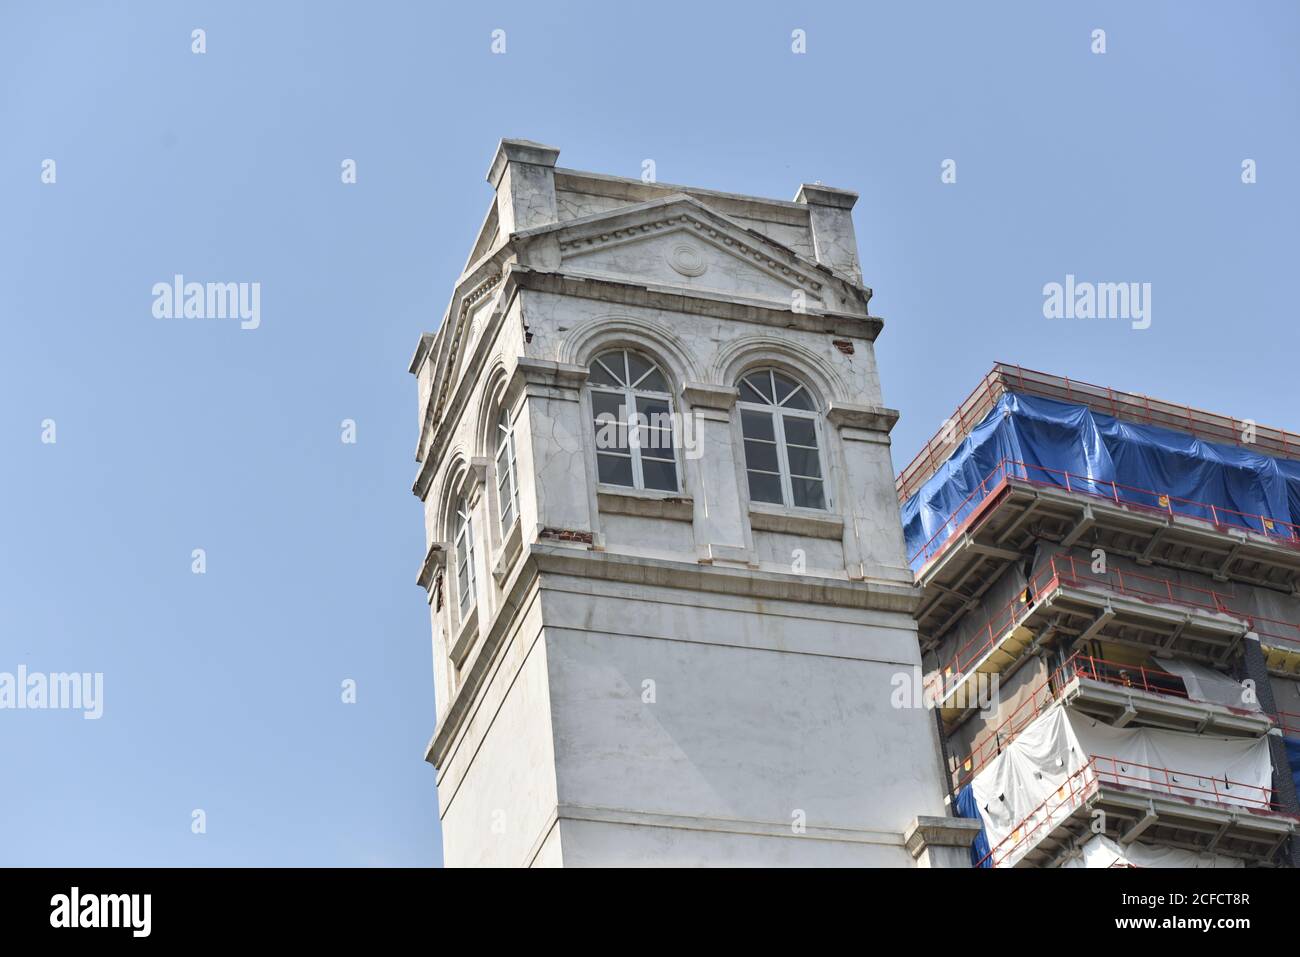 Historic tower of an old Russian office building built late 1800s. This image was taken on public property has no identifying marks and is location ne Stock Photo